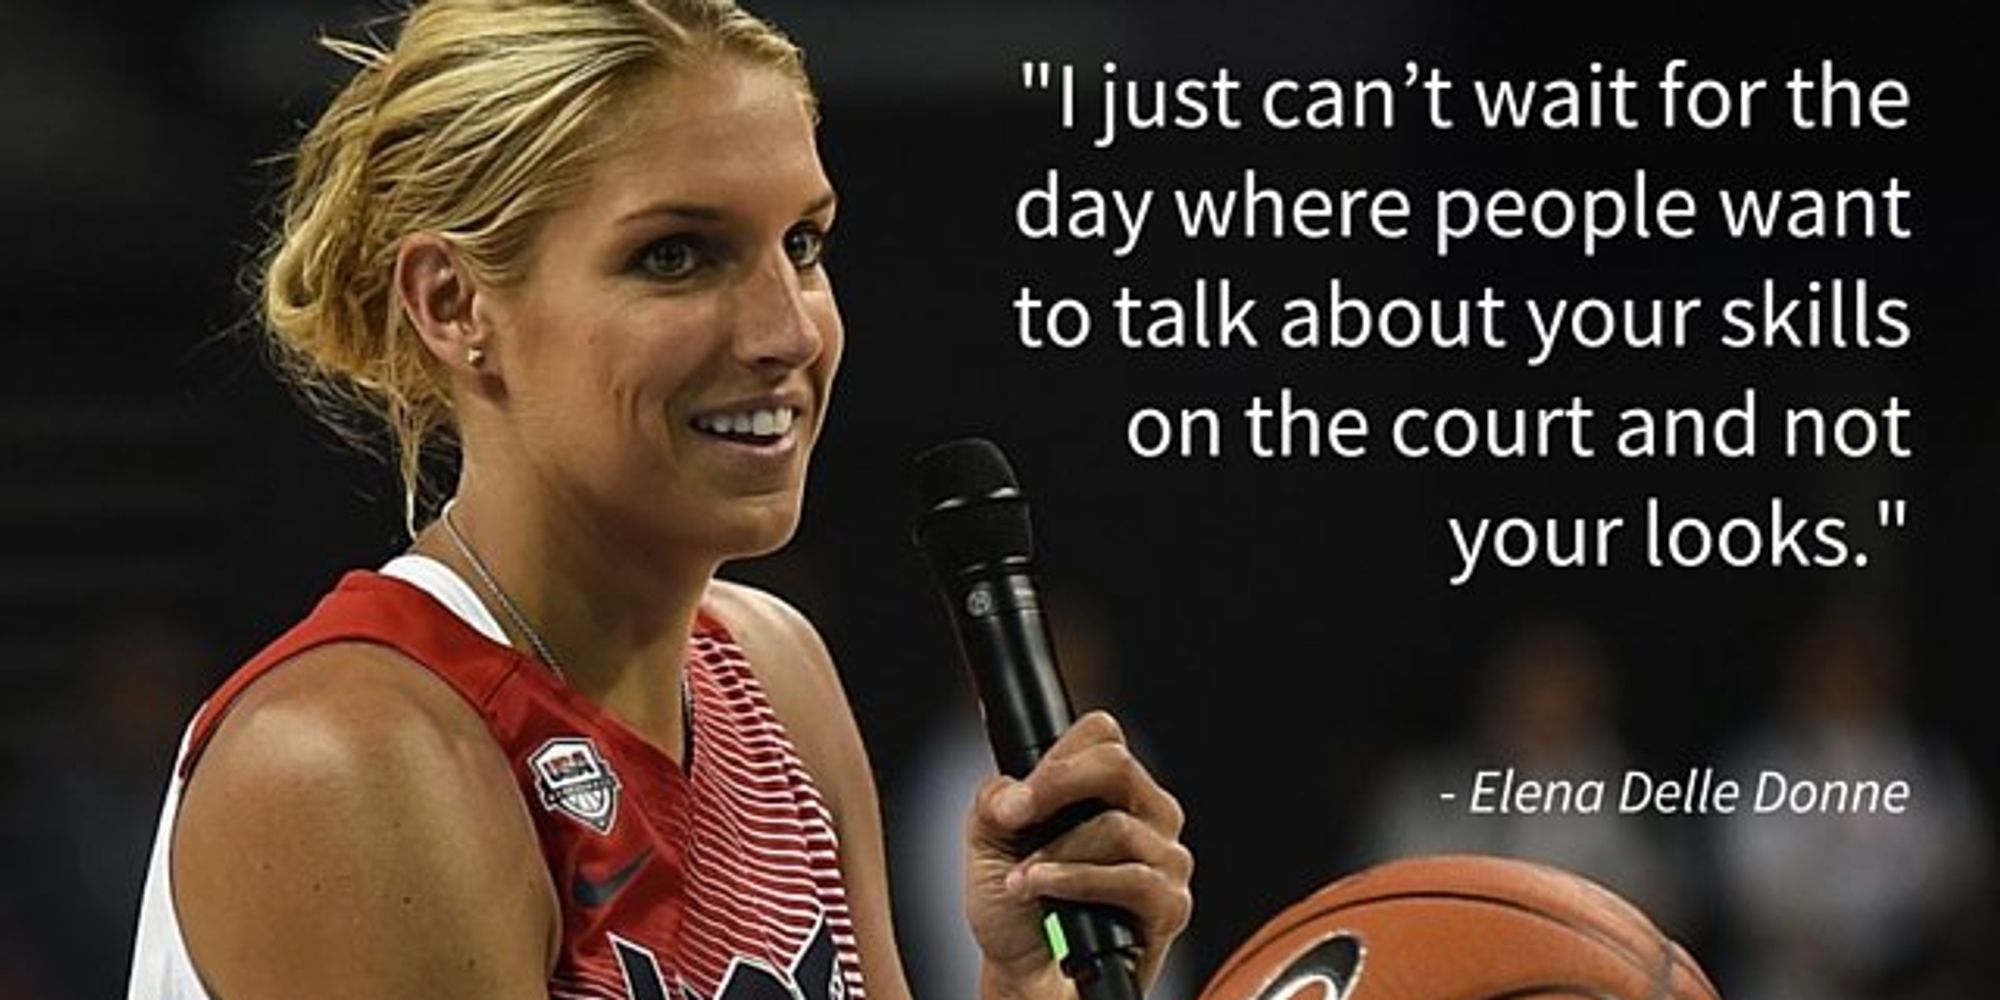 This Wnba Star Has Had Enough With Sexist Crap The Huffington Post 8516